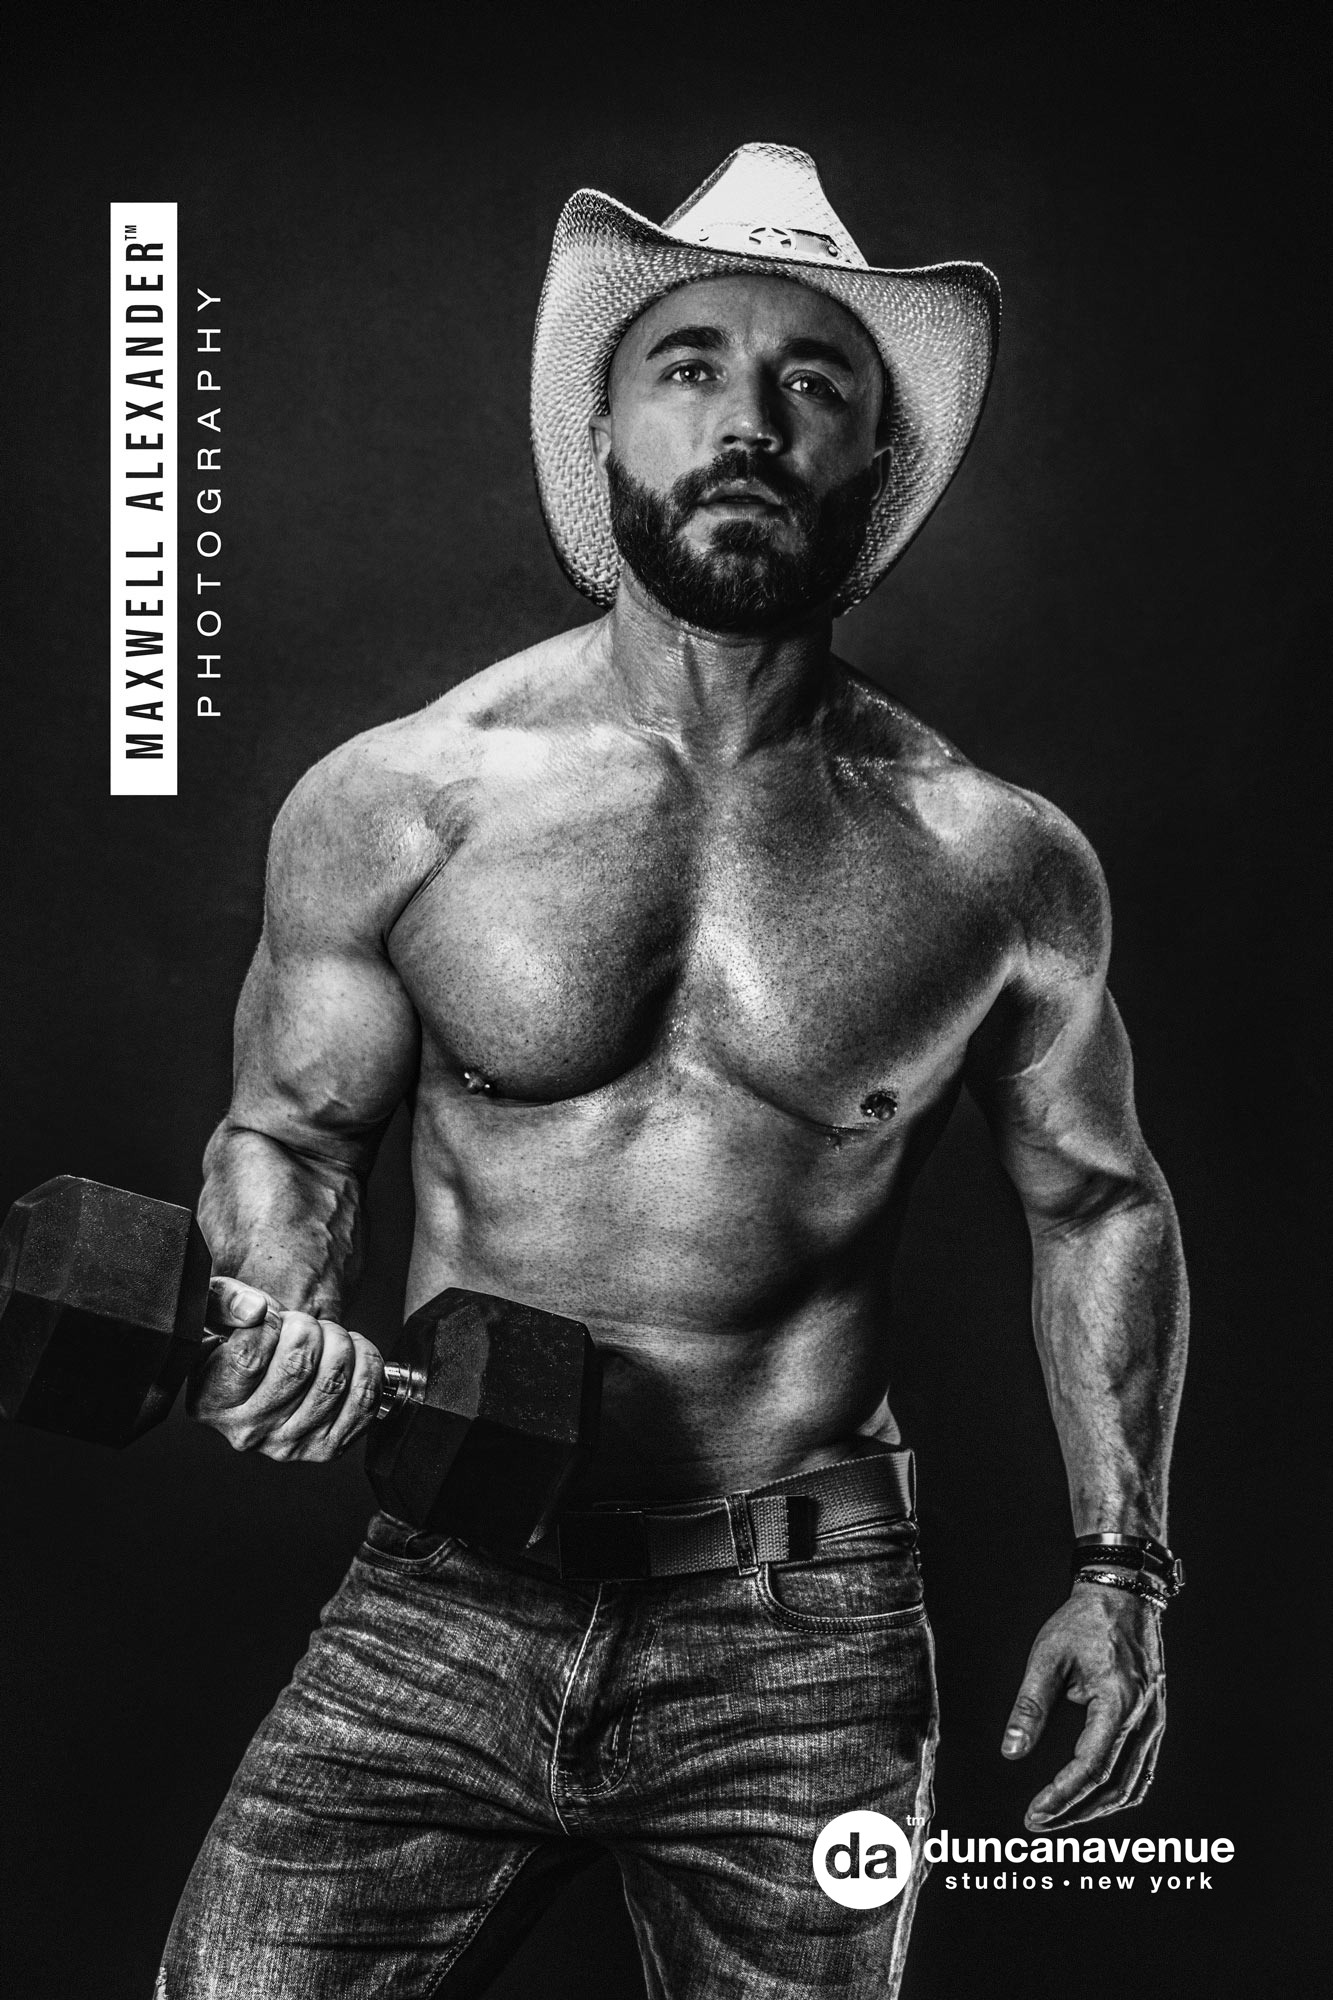 Top 15 Tips on getting into Bodybuilding – Fitness Motivation with Coach Maxwell Alexander – Fitness Photography by Duncan Avenue Studios, New York